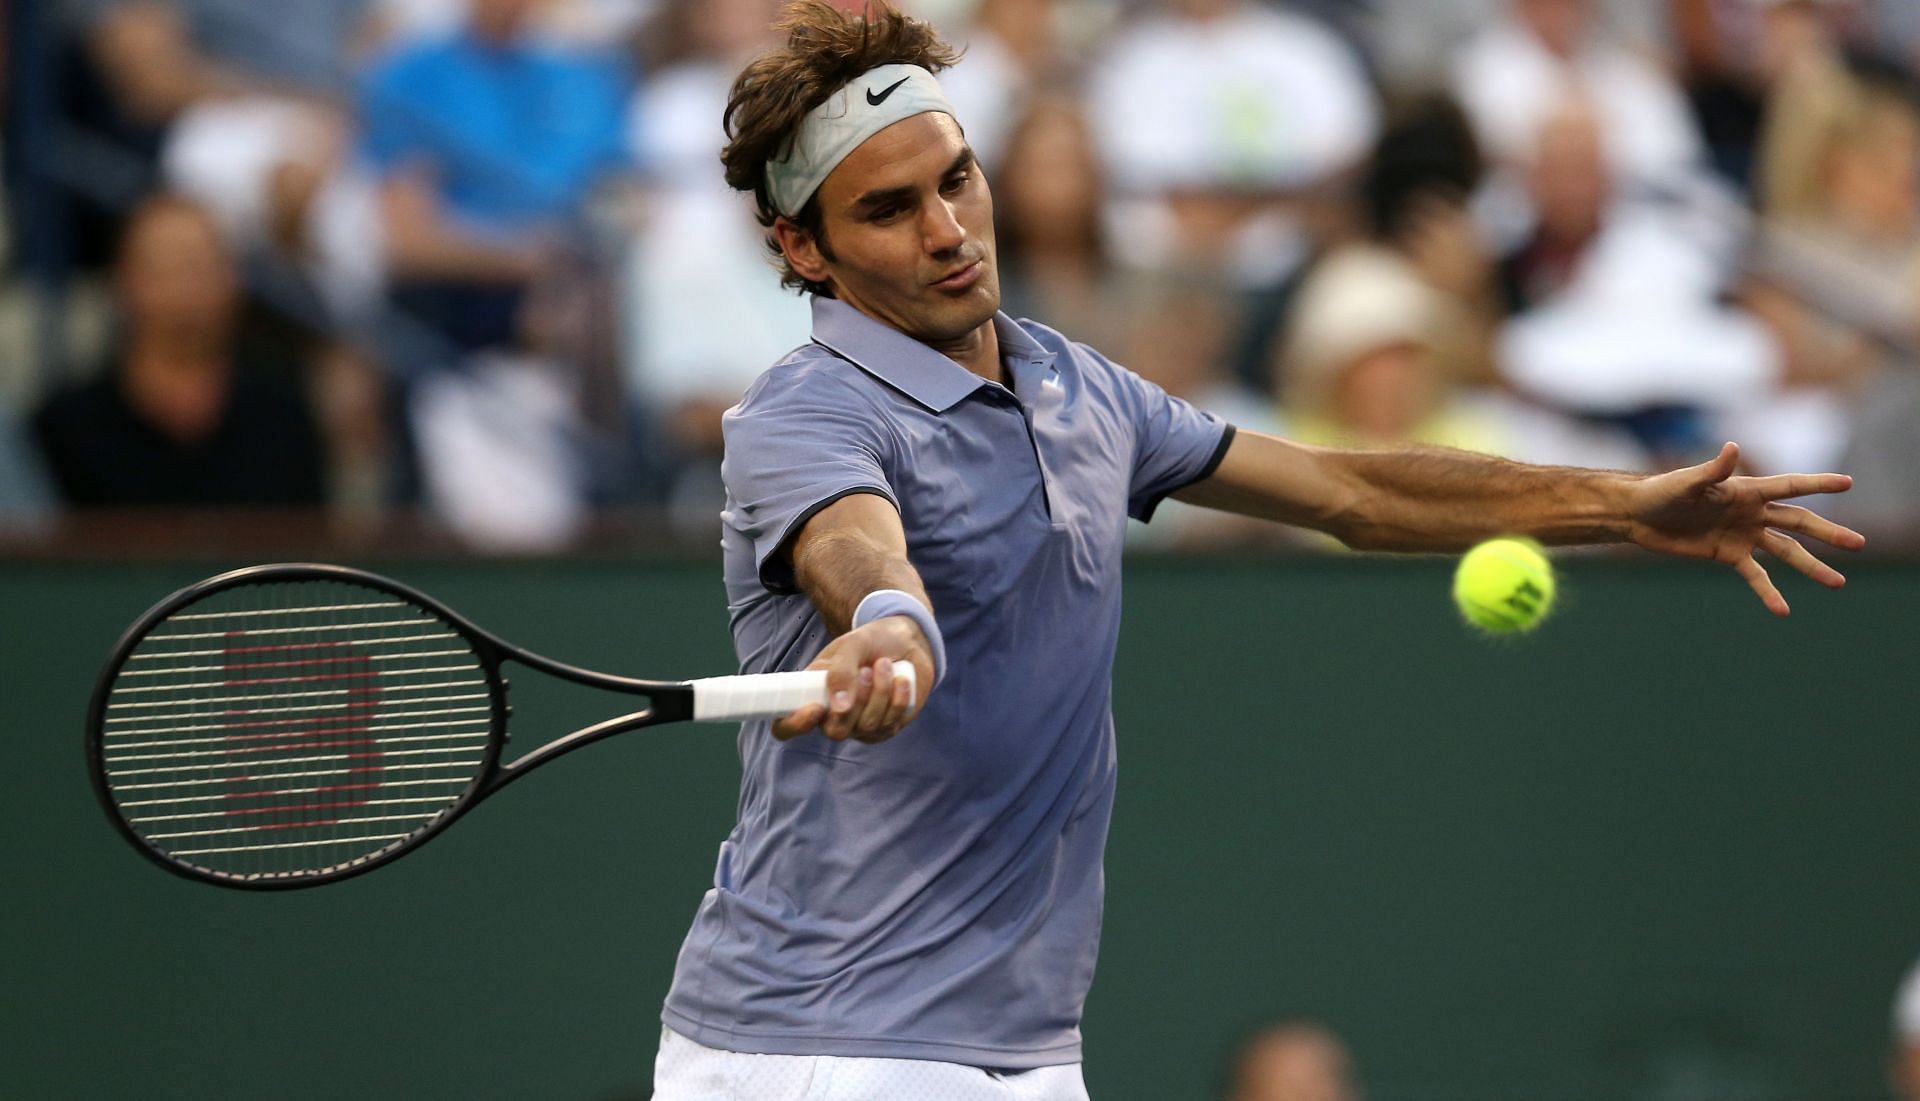 Roger Federer hits a return to Tommy Haas of Germany during the BNP Paribas Open at Indian Wells